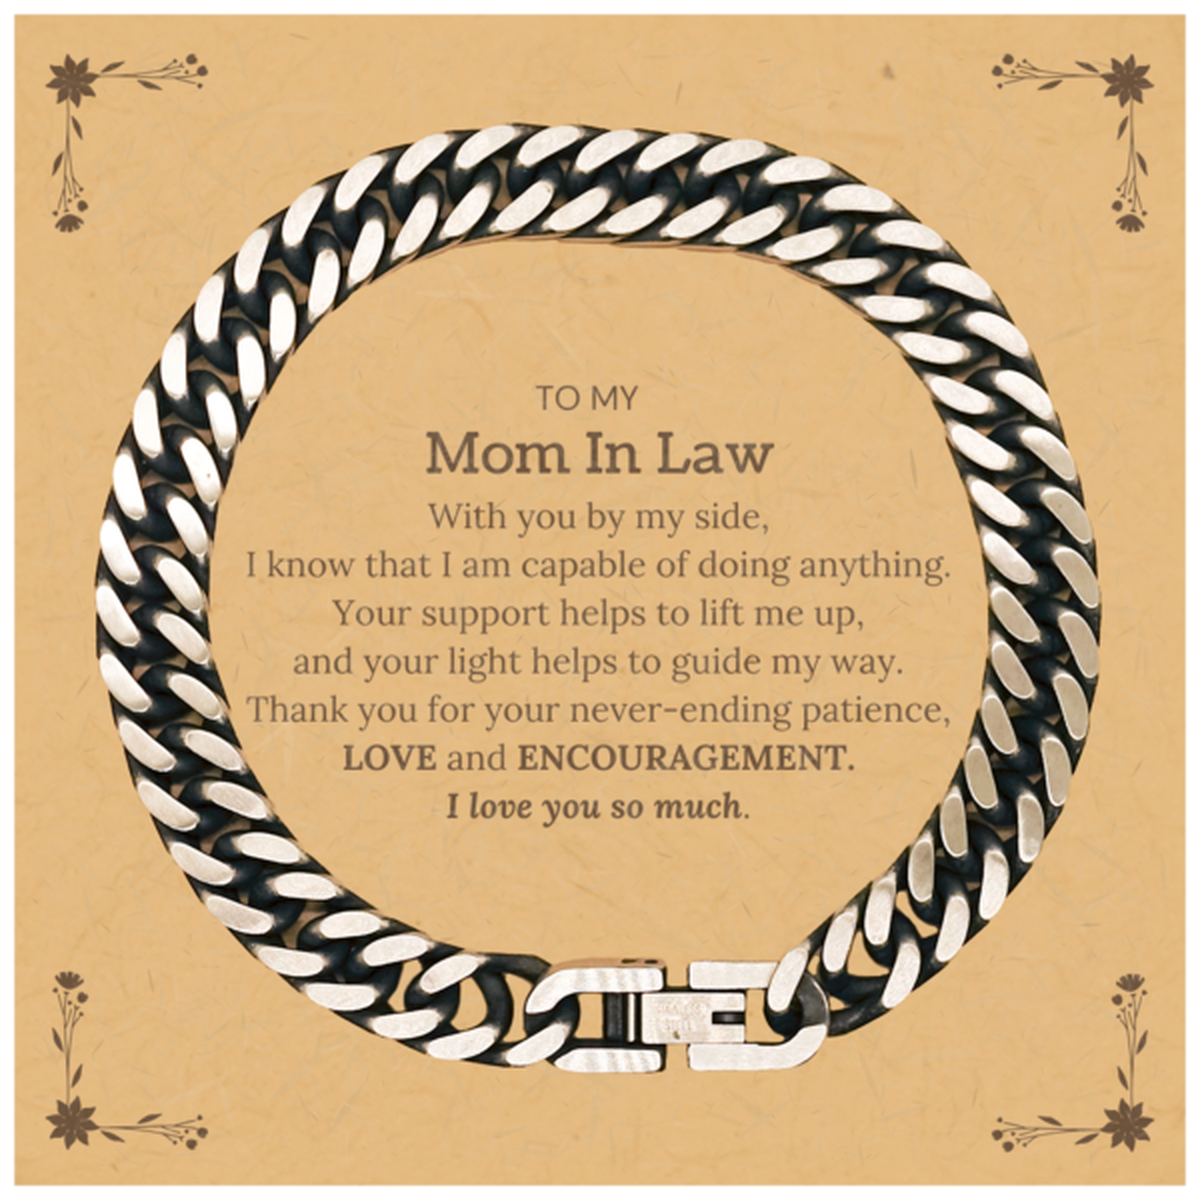 Appreciation Mom In Law Cuban Link Chain Bracelet Gifts, To My Mom In Law Birthday Christmas Wedding Keepsake Gifts for Mom In Law With you by my side, I know that I am capable of doing anything. I love you so much